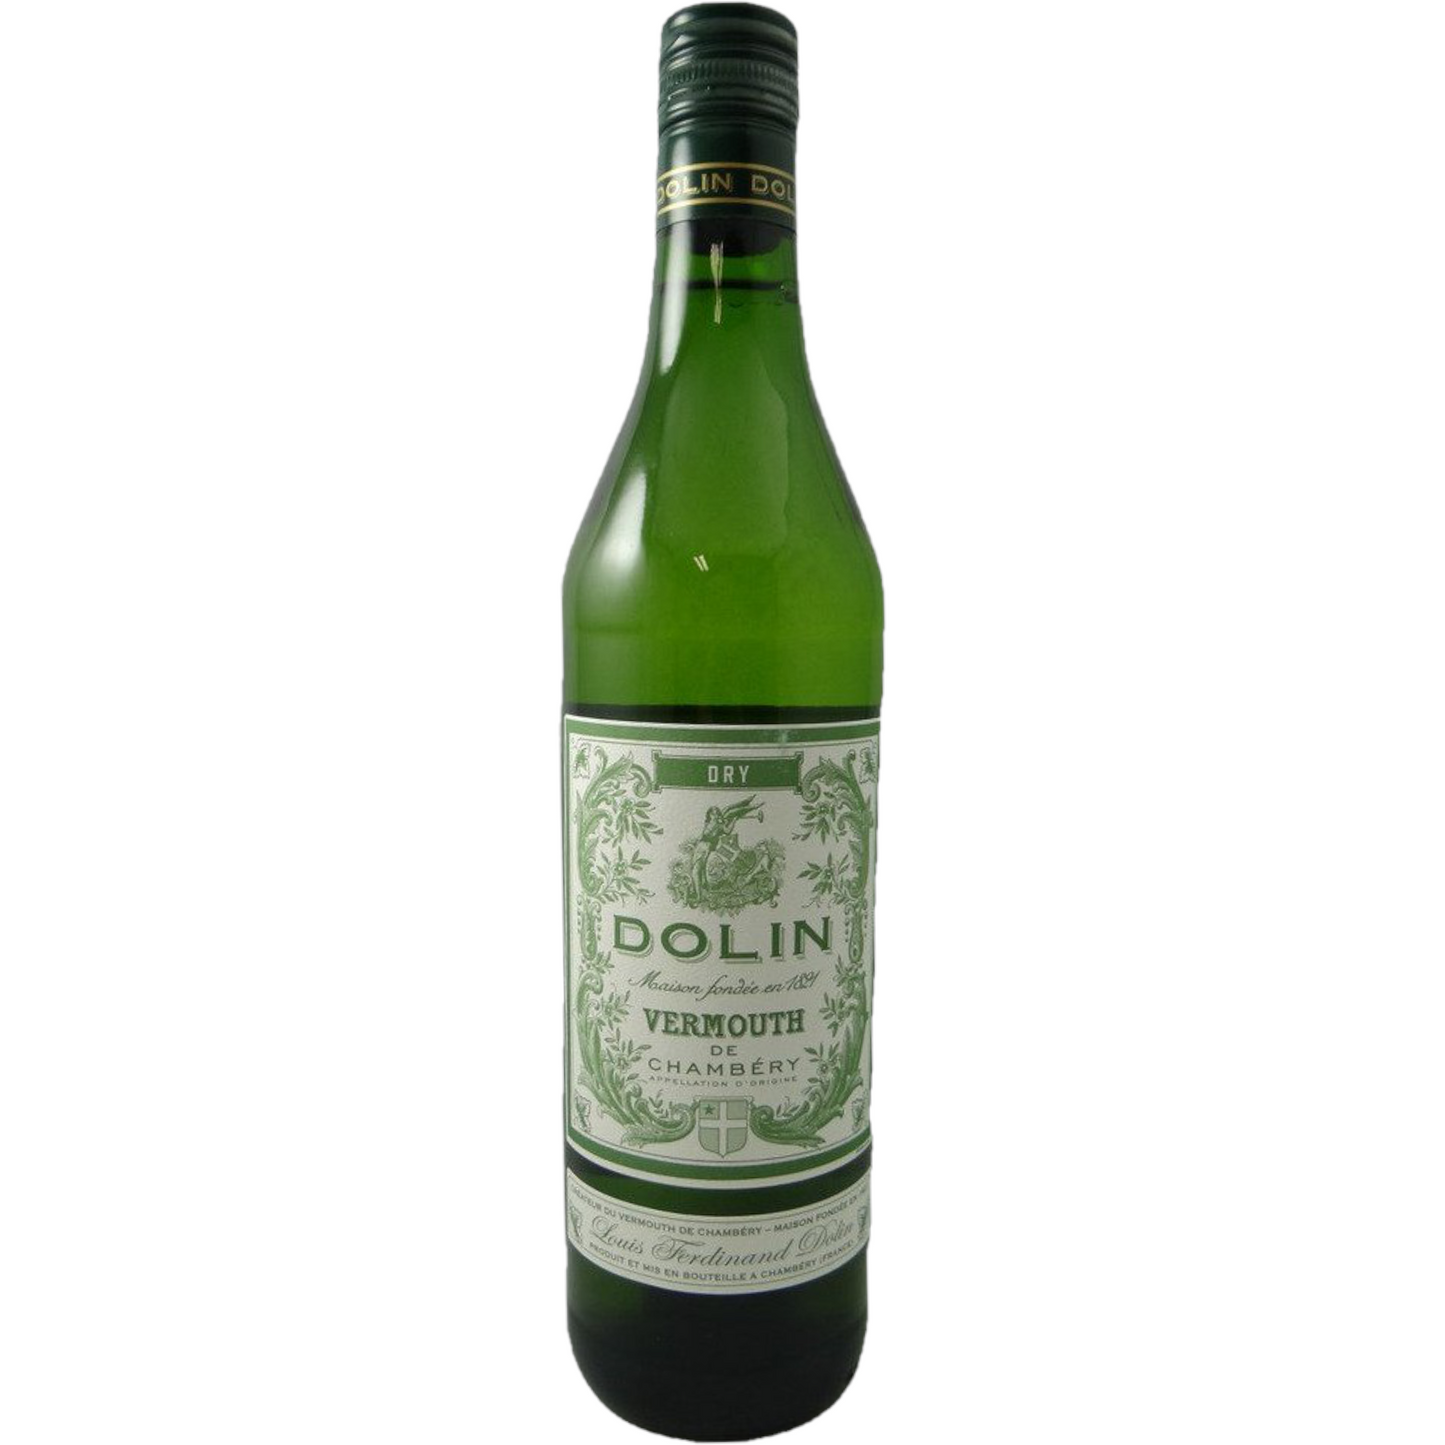 DOLIN VERMOUTH DRY